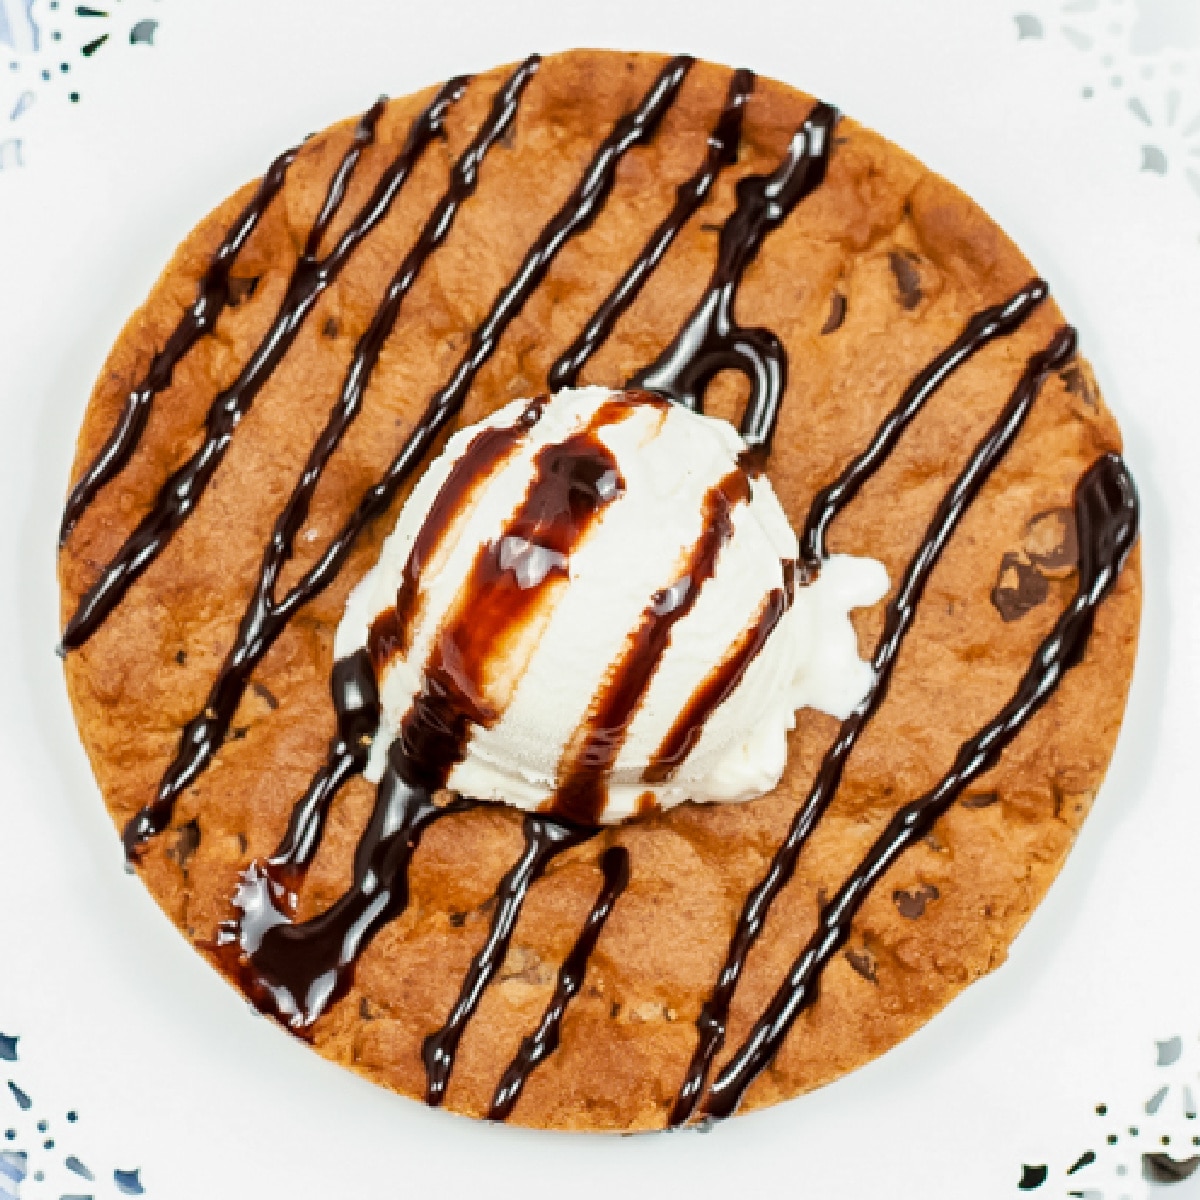 https://justisafourletterword.com/wp-content/uploads/2021/04/pizookie-recipe-without-skillet.jpg